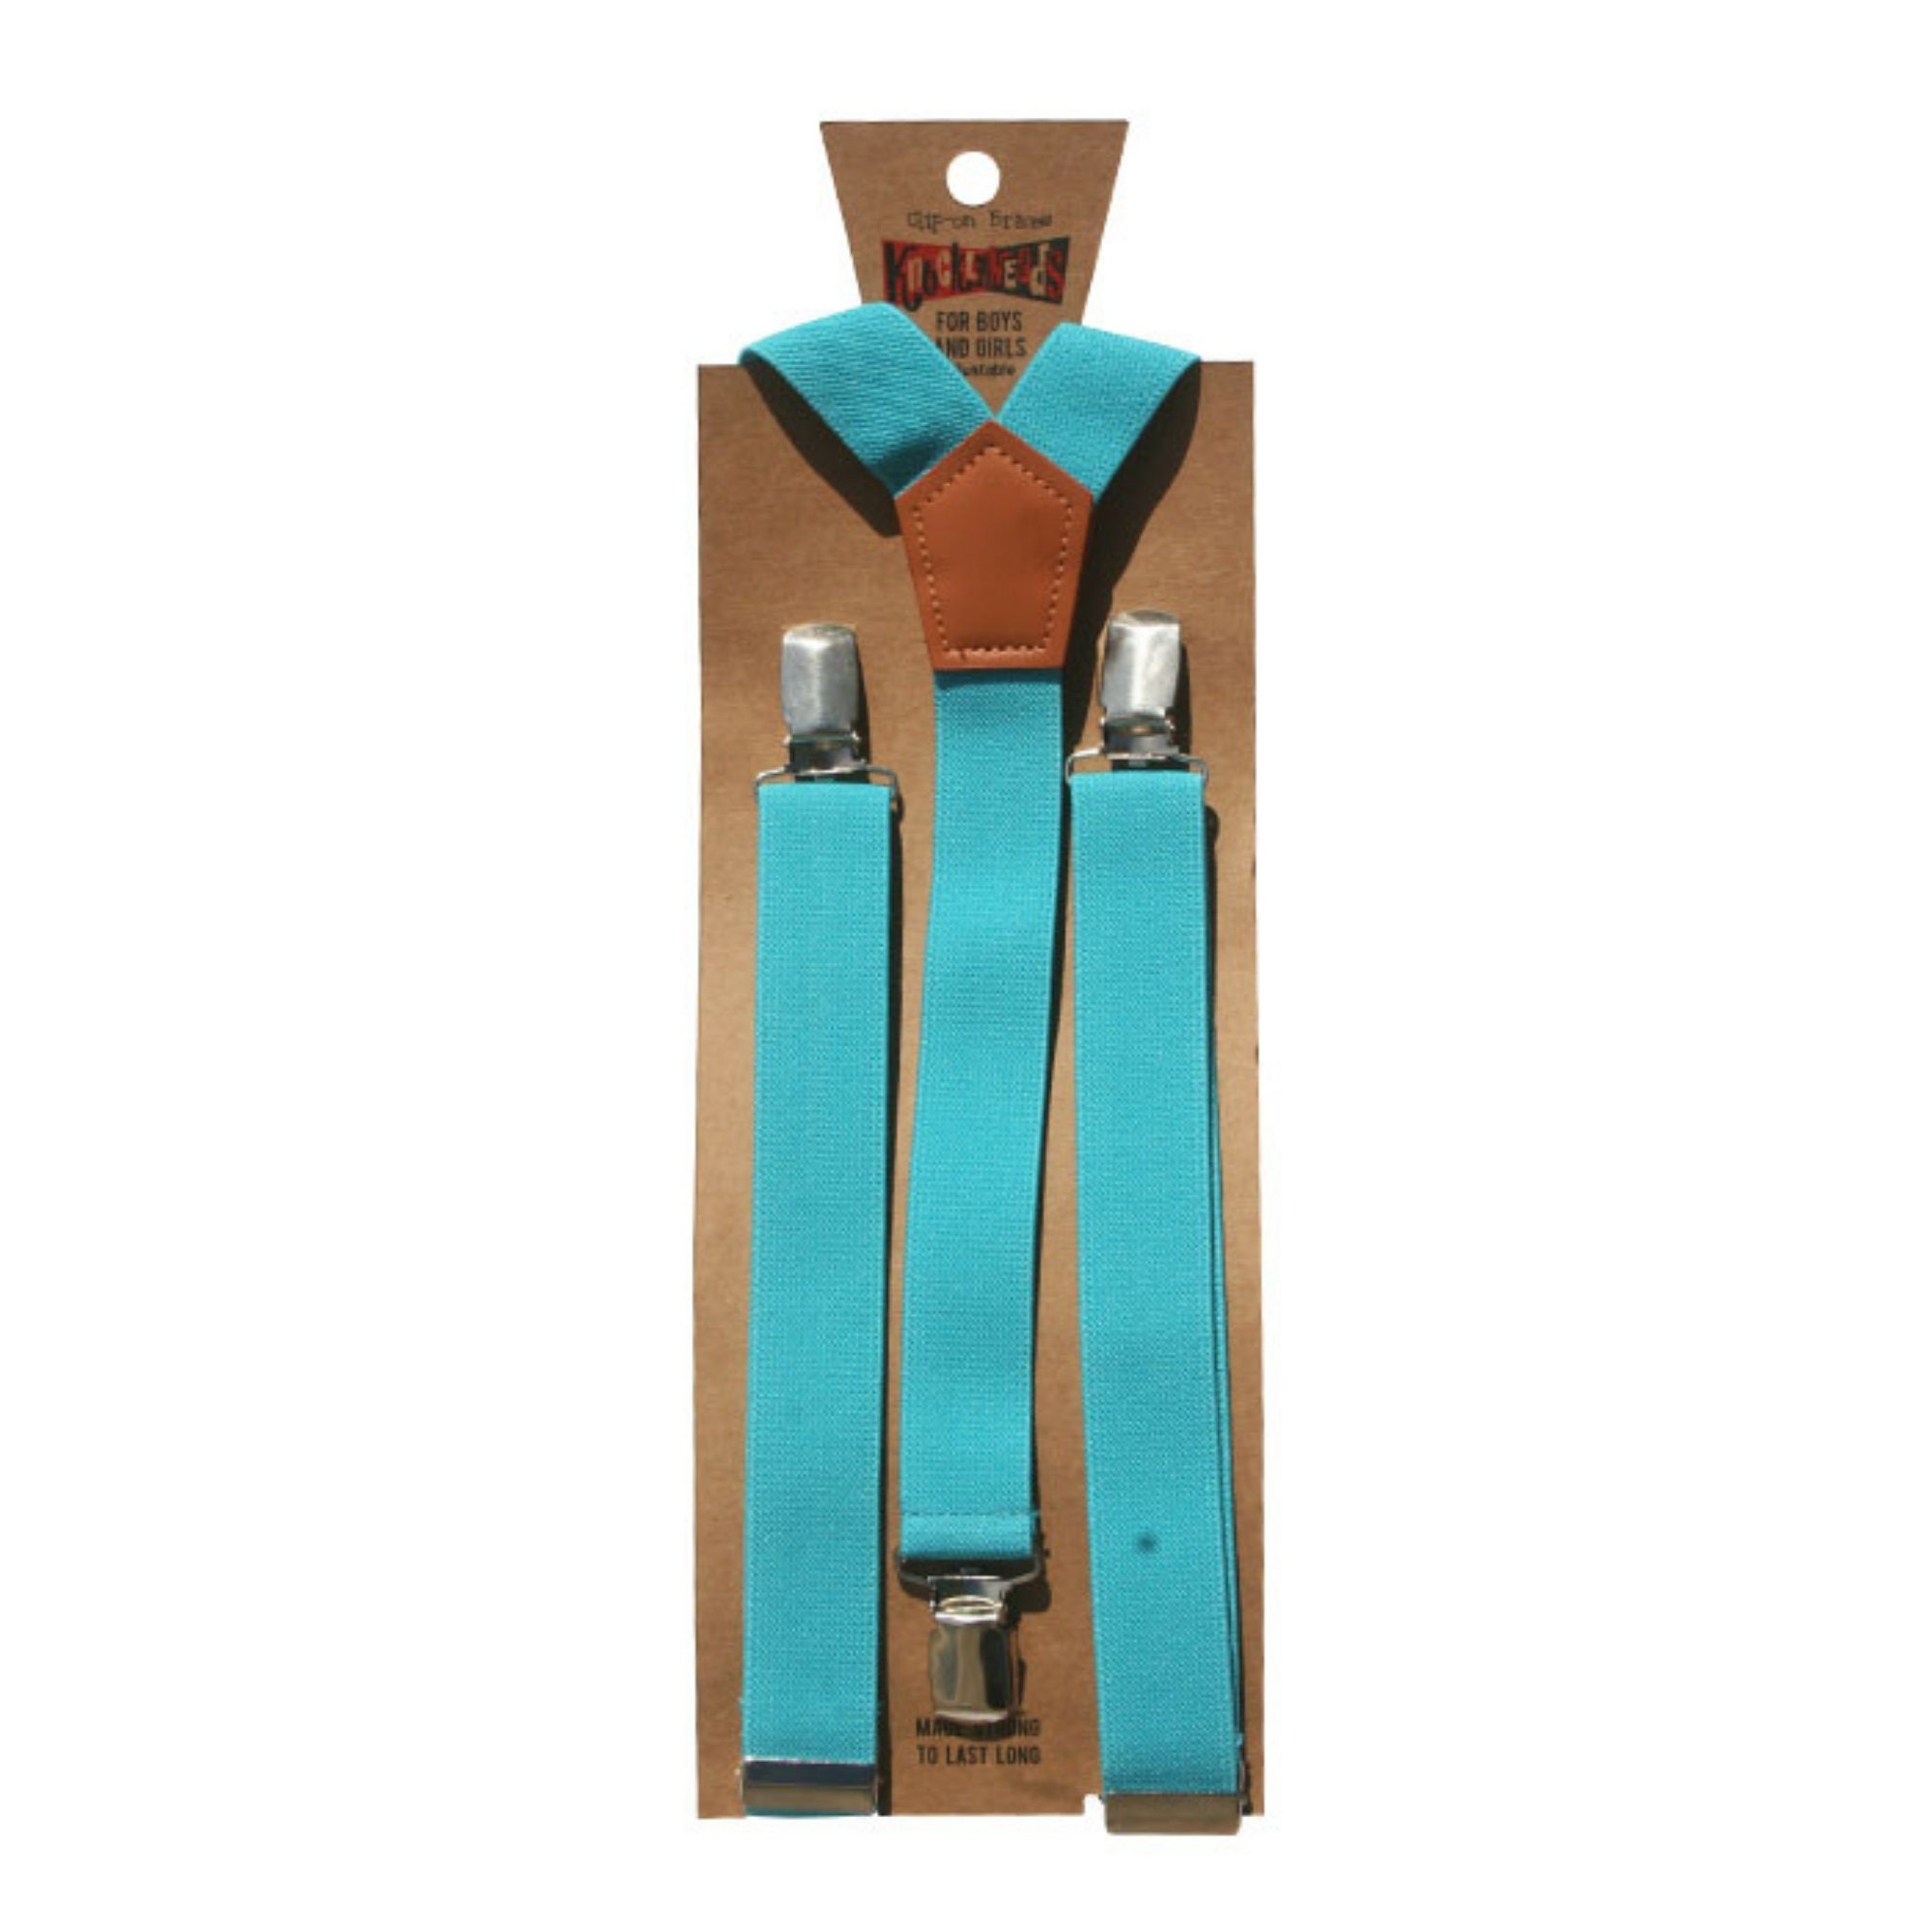 ELASTIC SUSPENDERS for Kids Perfect for Rustic Vintage Wedding Easter Gift Ring Bearer Outfits for Boys and Toddlers Baby Braces Kids Accessoires Riemen & bretels Bretels 